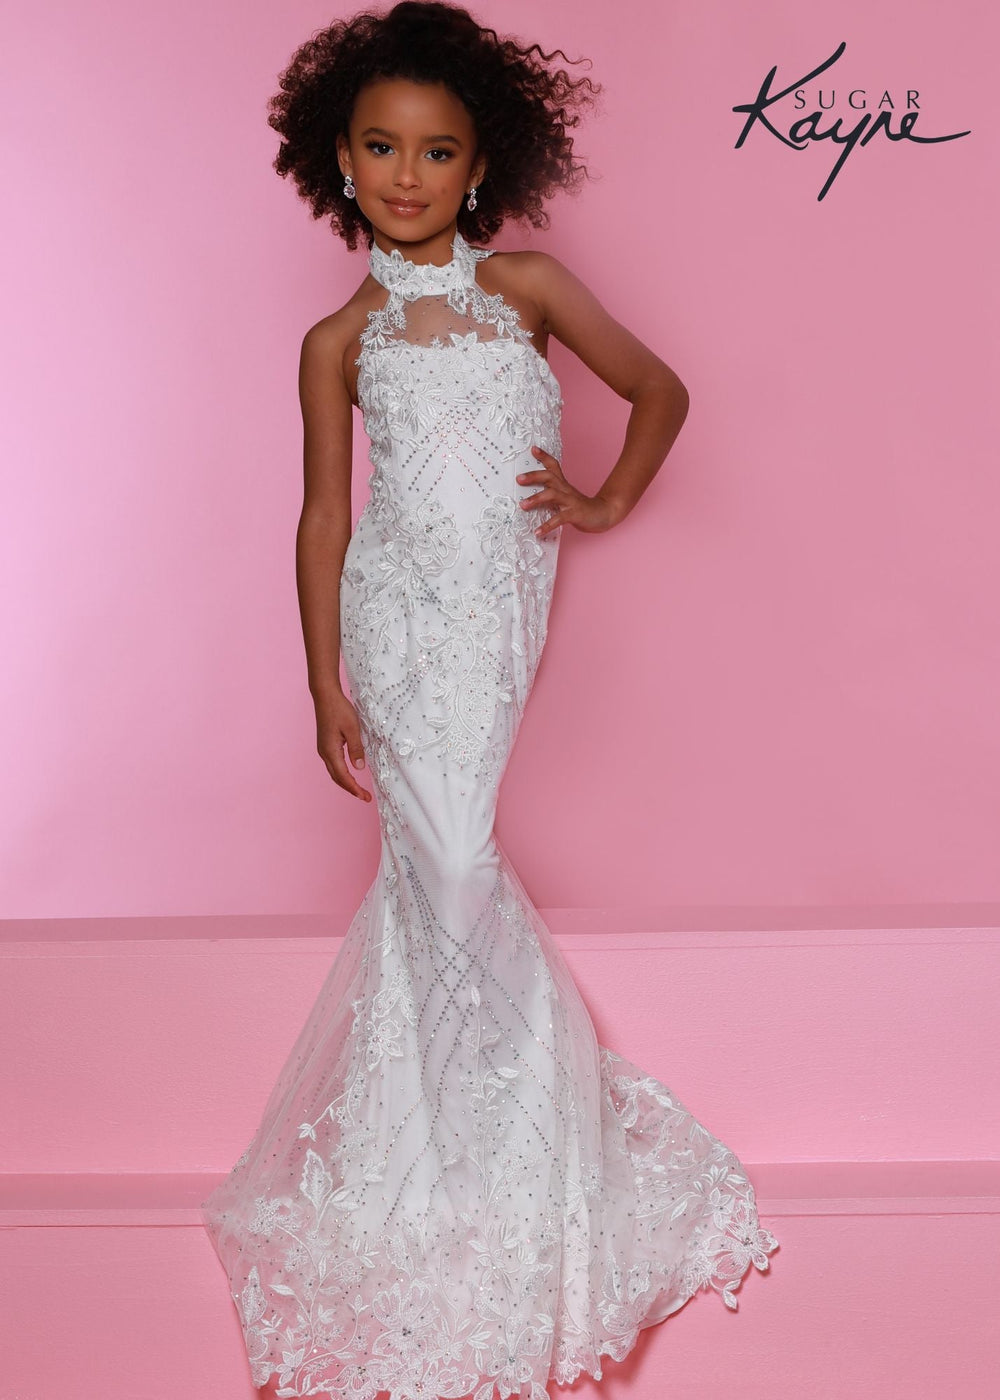 Sugar Kayne C323 Long Fitted Lace Crystal Girls Pageant Dress Detachable Overskirt Gown - FOSTANI